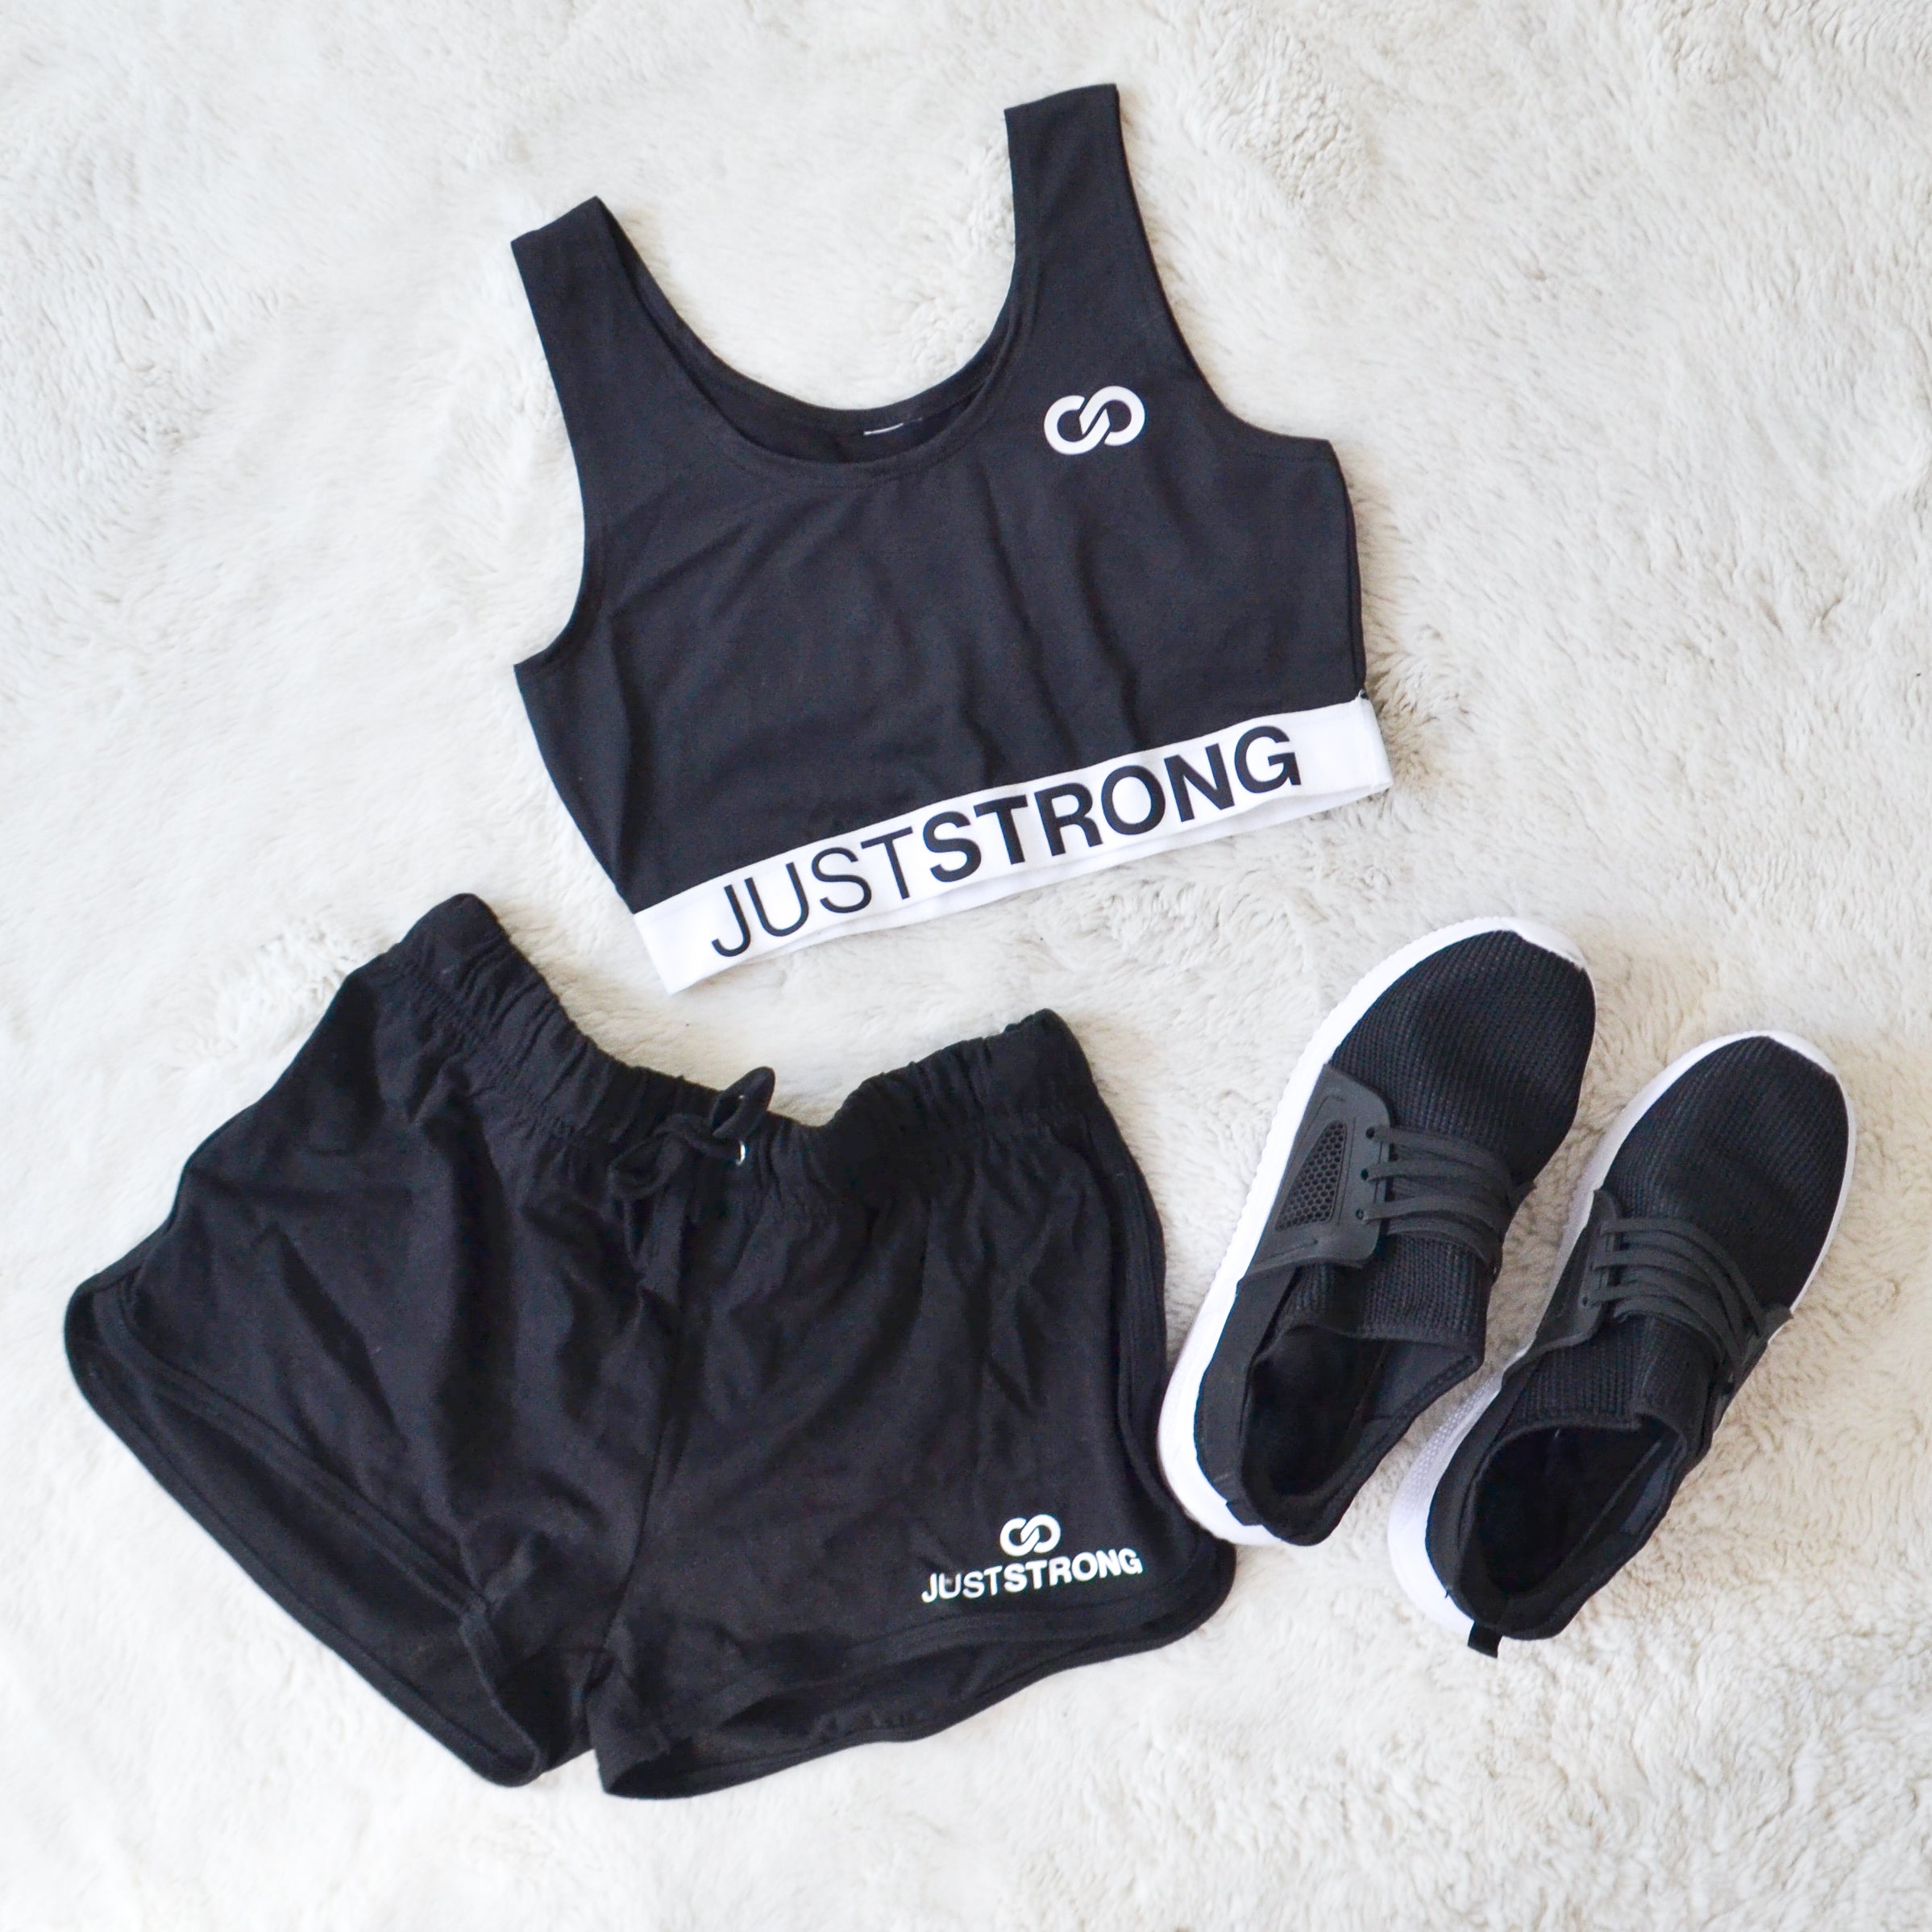 Just Strong - Clothing for Strong Women